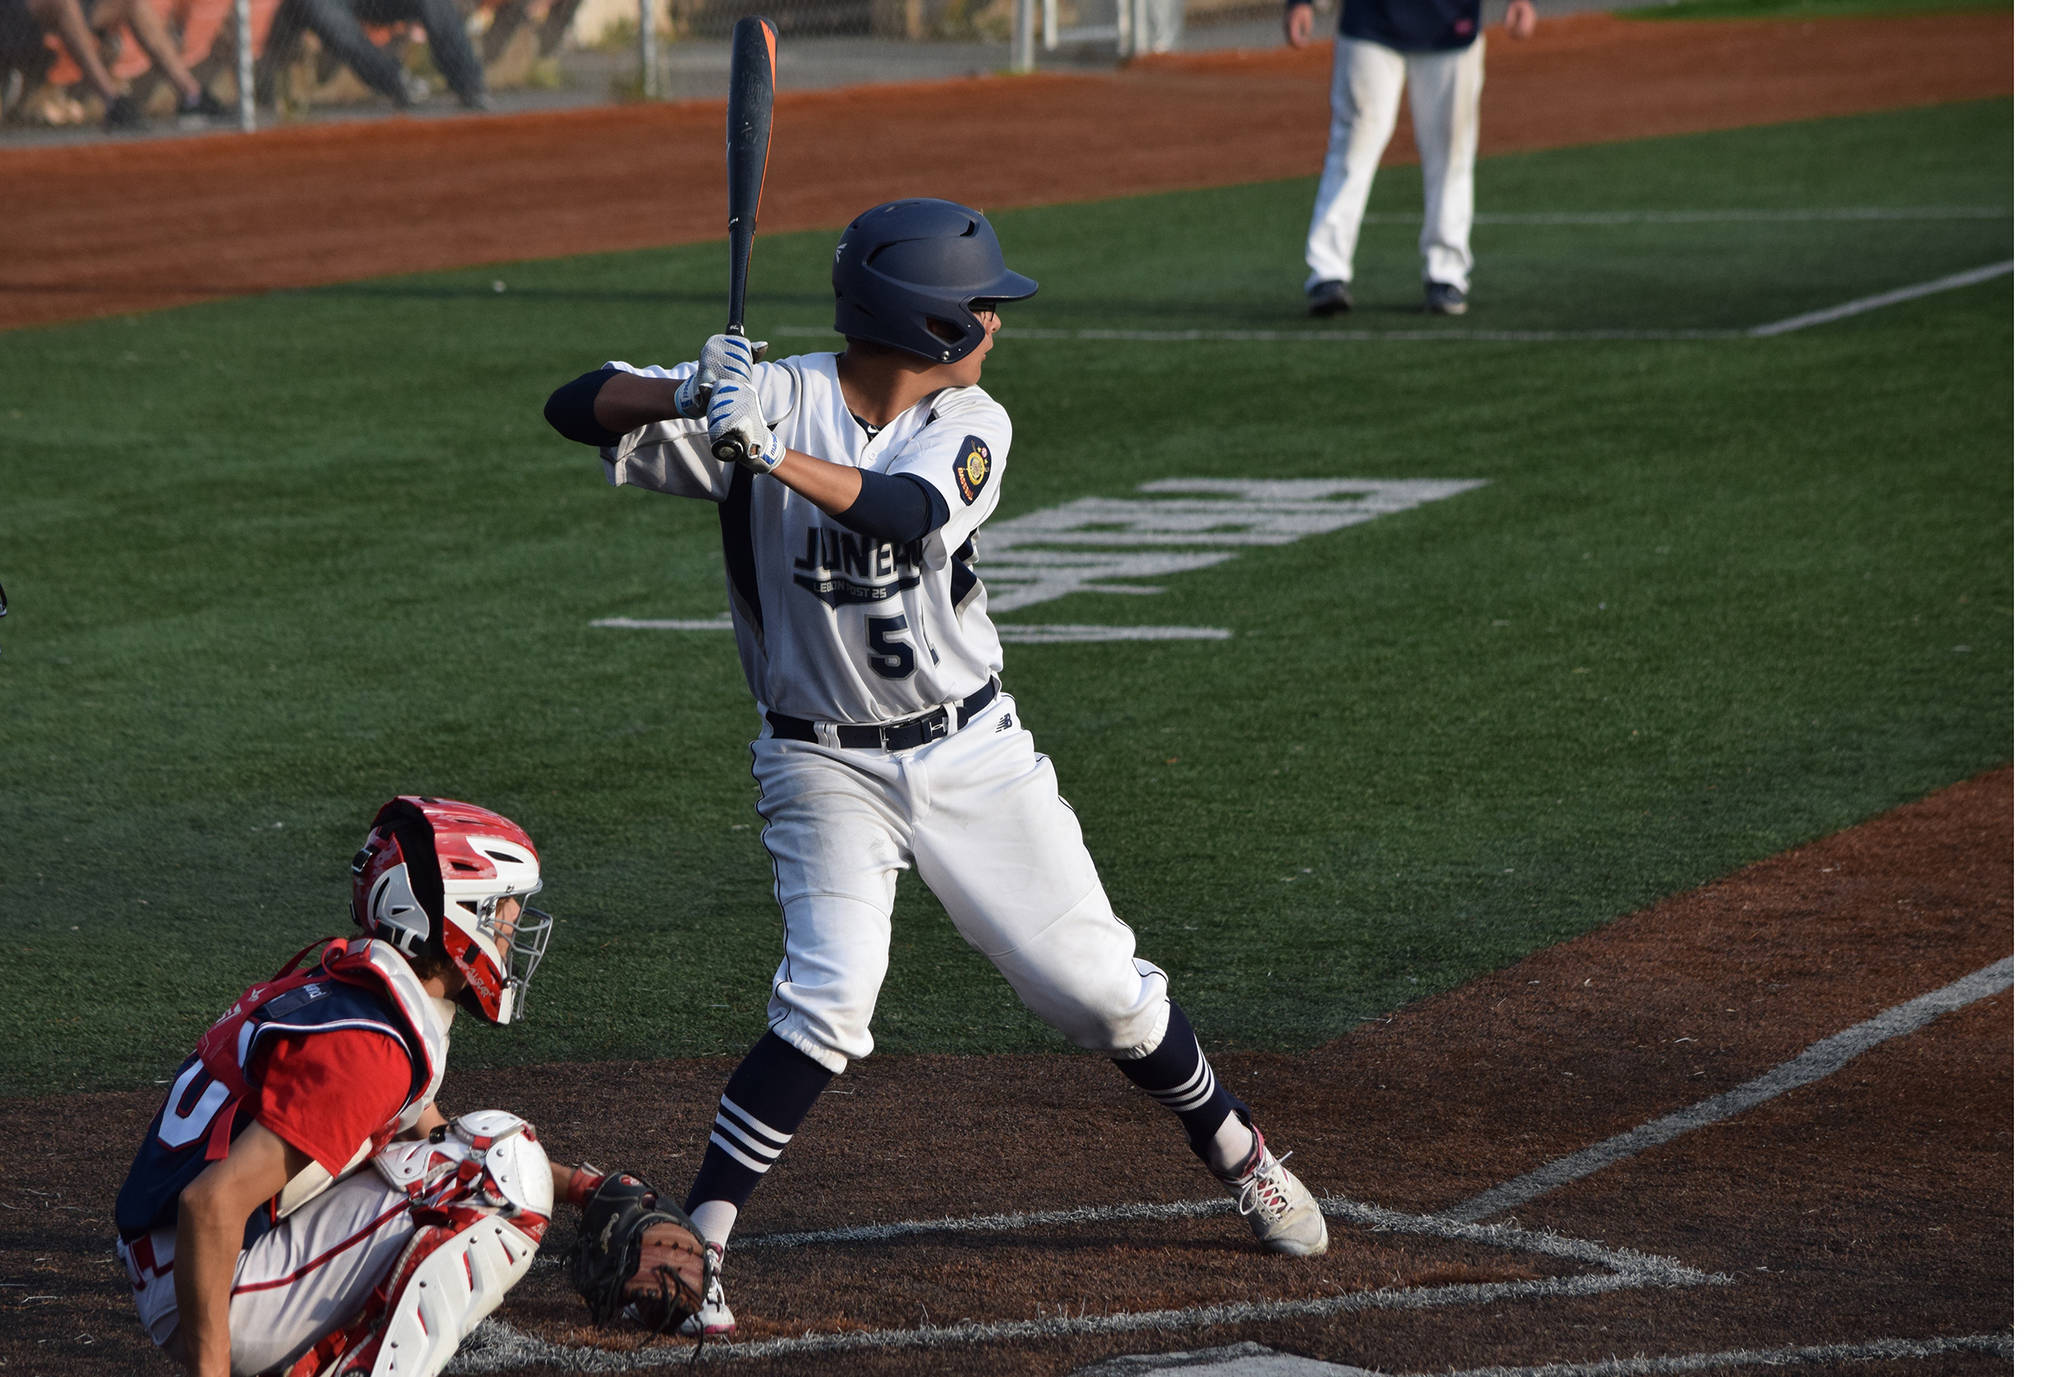 Juneau Post 25’s Oliver Mendoza bats against Wasilla Post 35 in the American Legion Alaska state championship game on Tuesday, July 30, 2019, at Mulcahy Stadium in Anchorage. (Nolin Ainsworth | Juneau Empire)